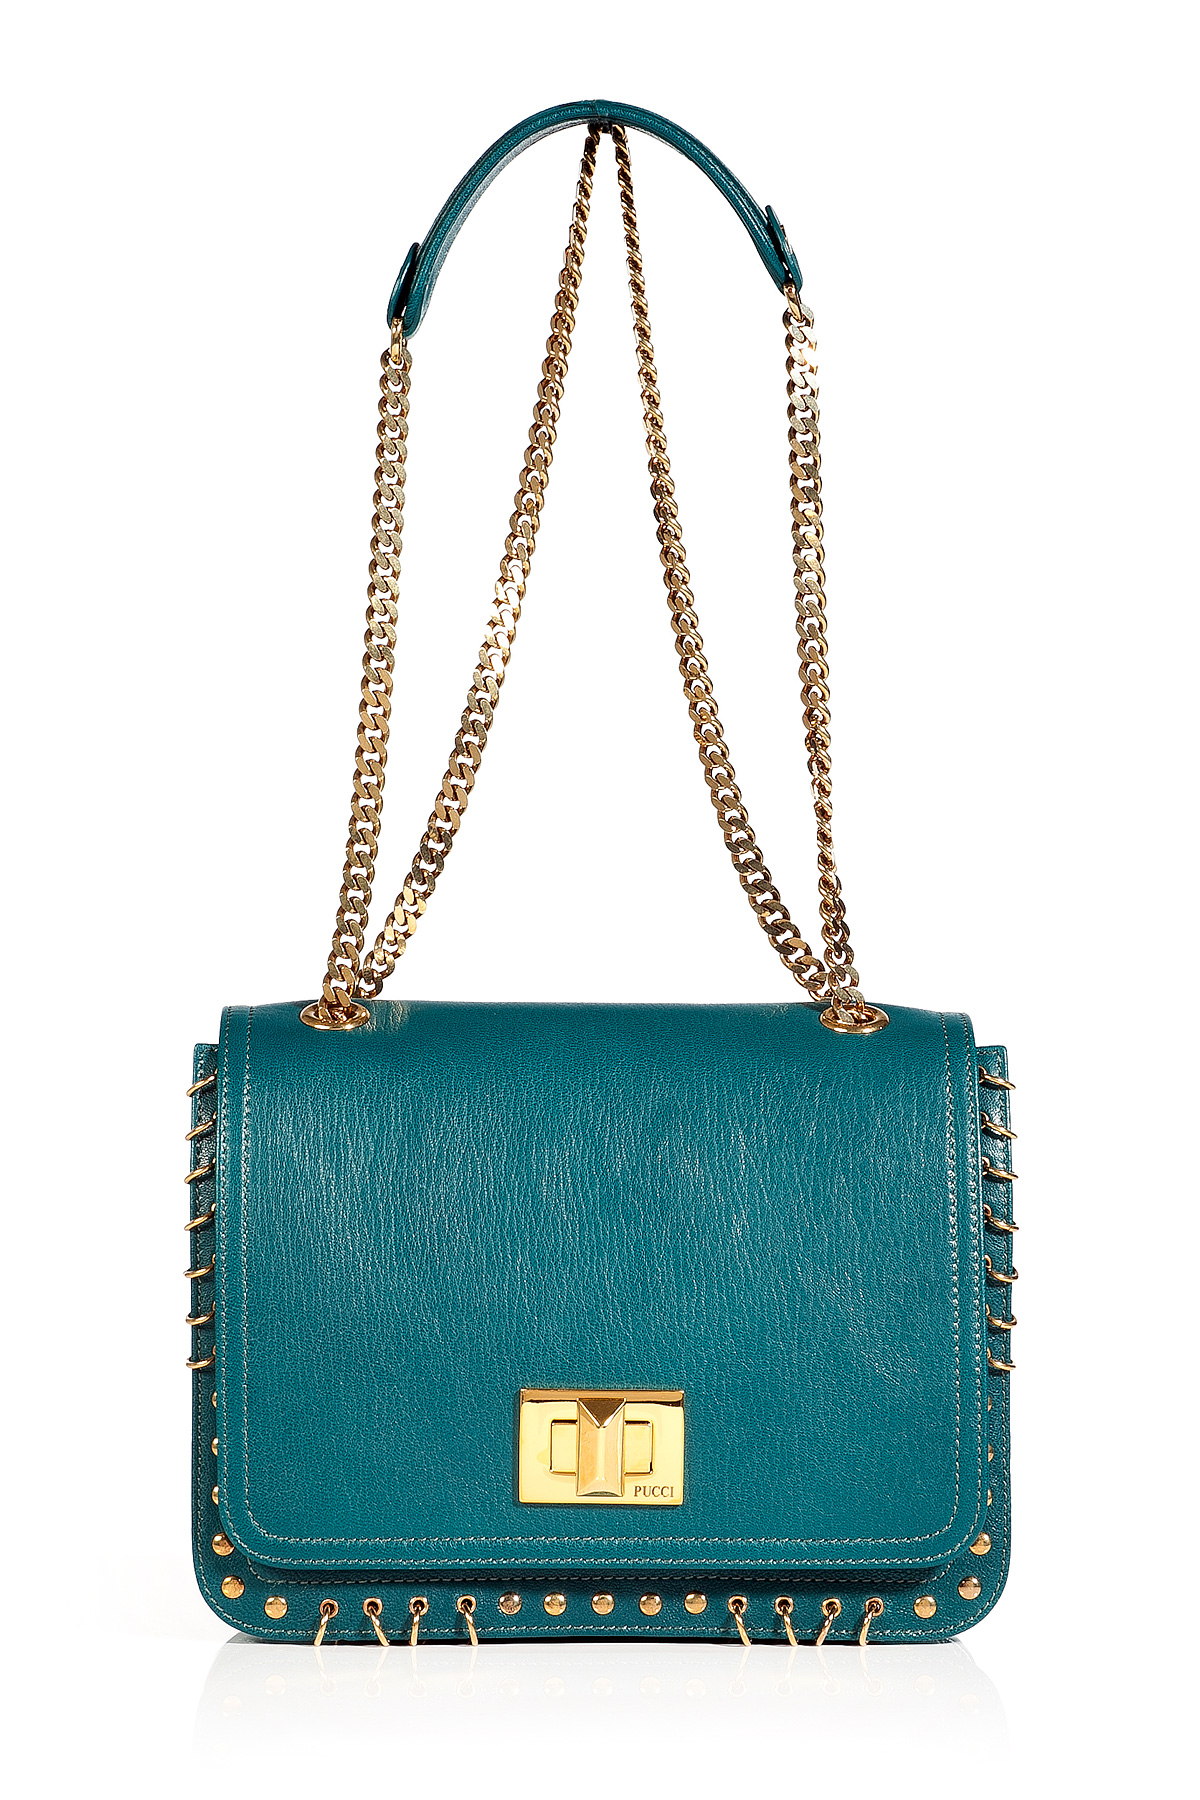 Lyst - Emilio Pucci Petrol and Gold Studded Satchel in Blue